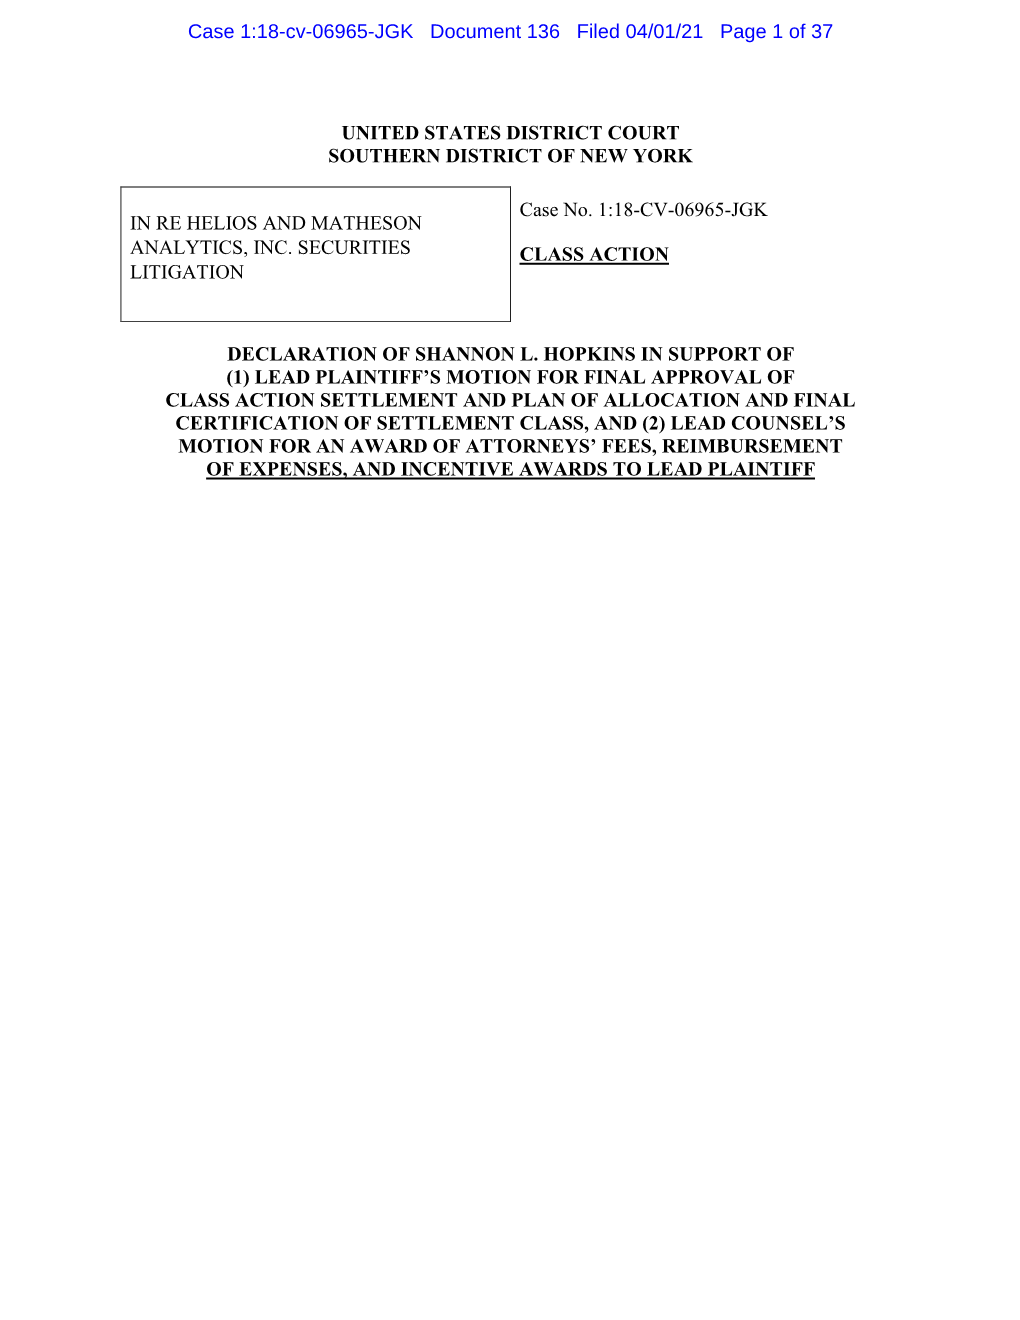 Lead Plaintiff's Motion for Final Approval Of